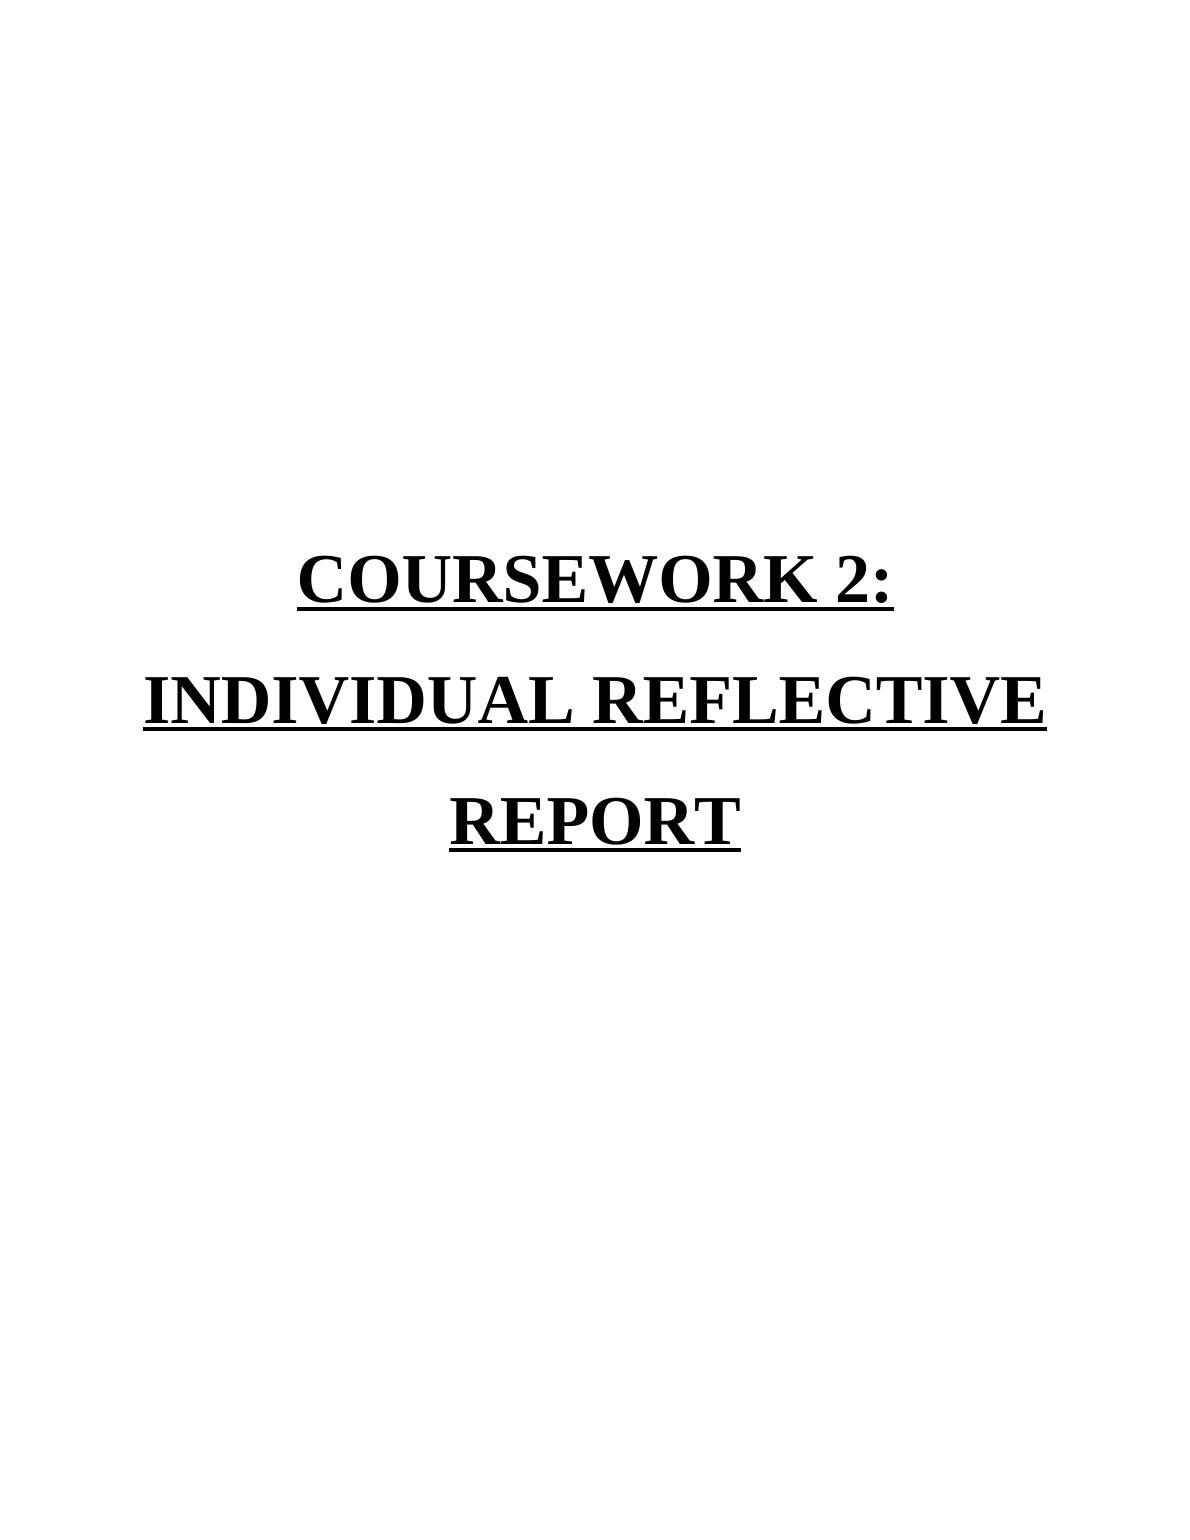 Individual Reflective Report Assignment_1